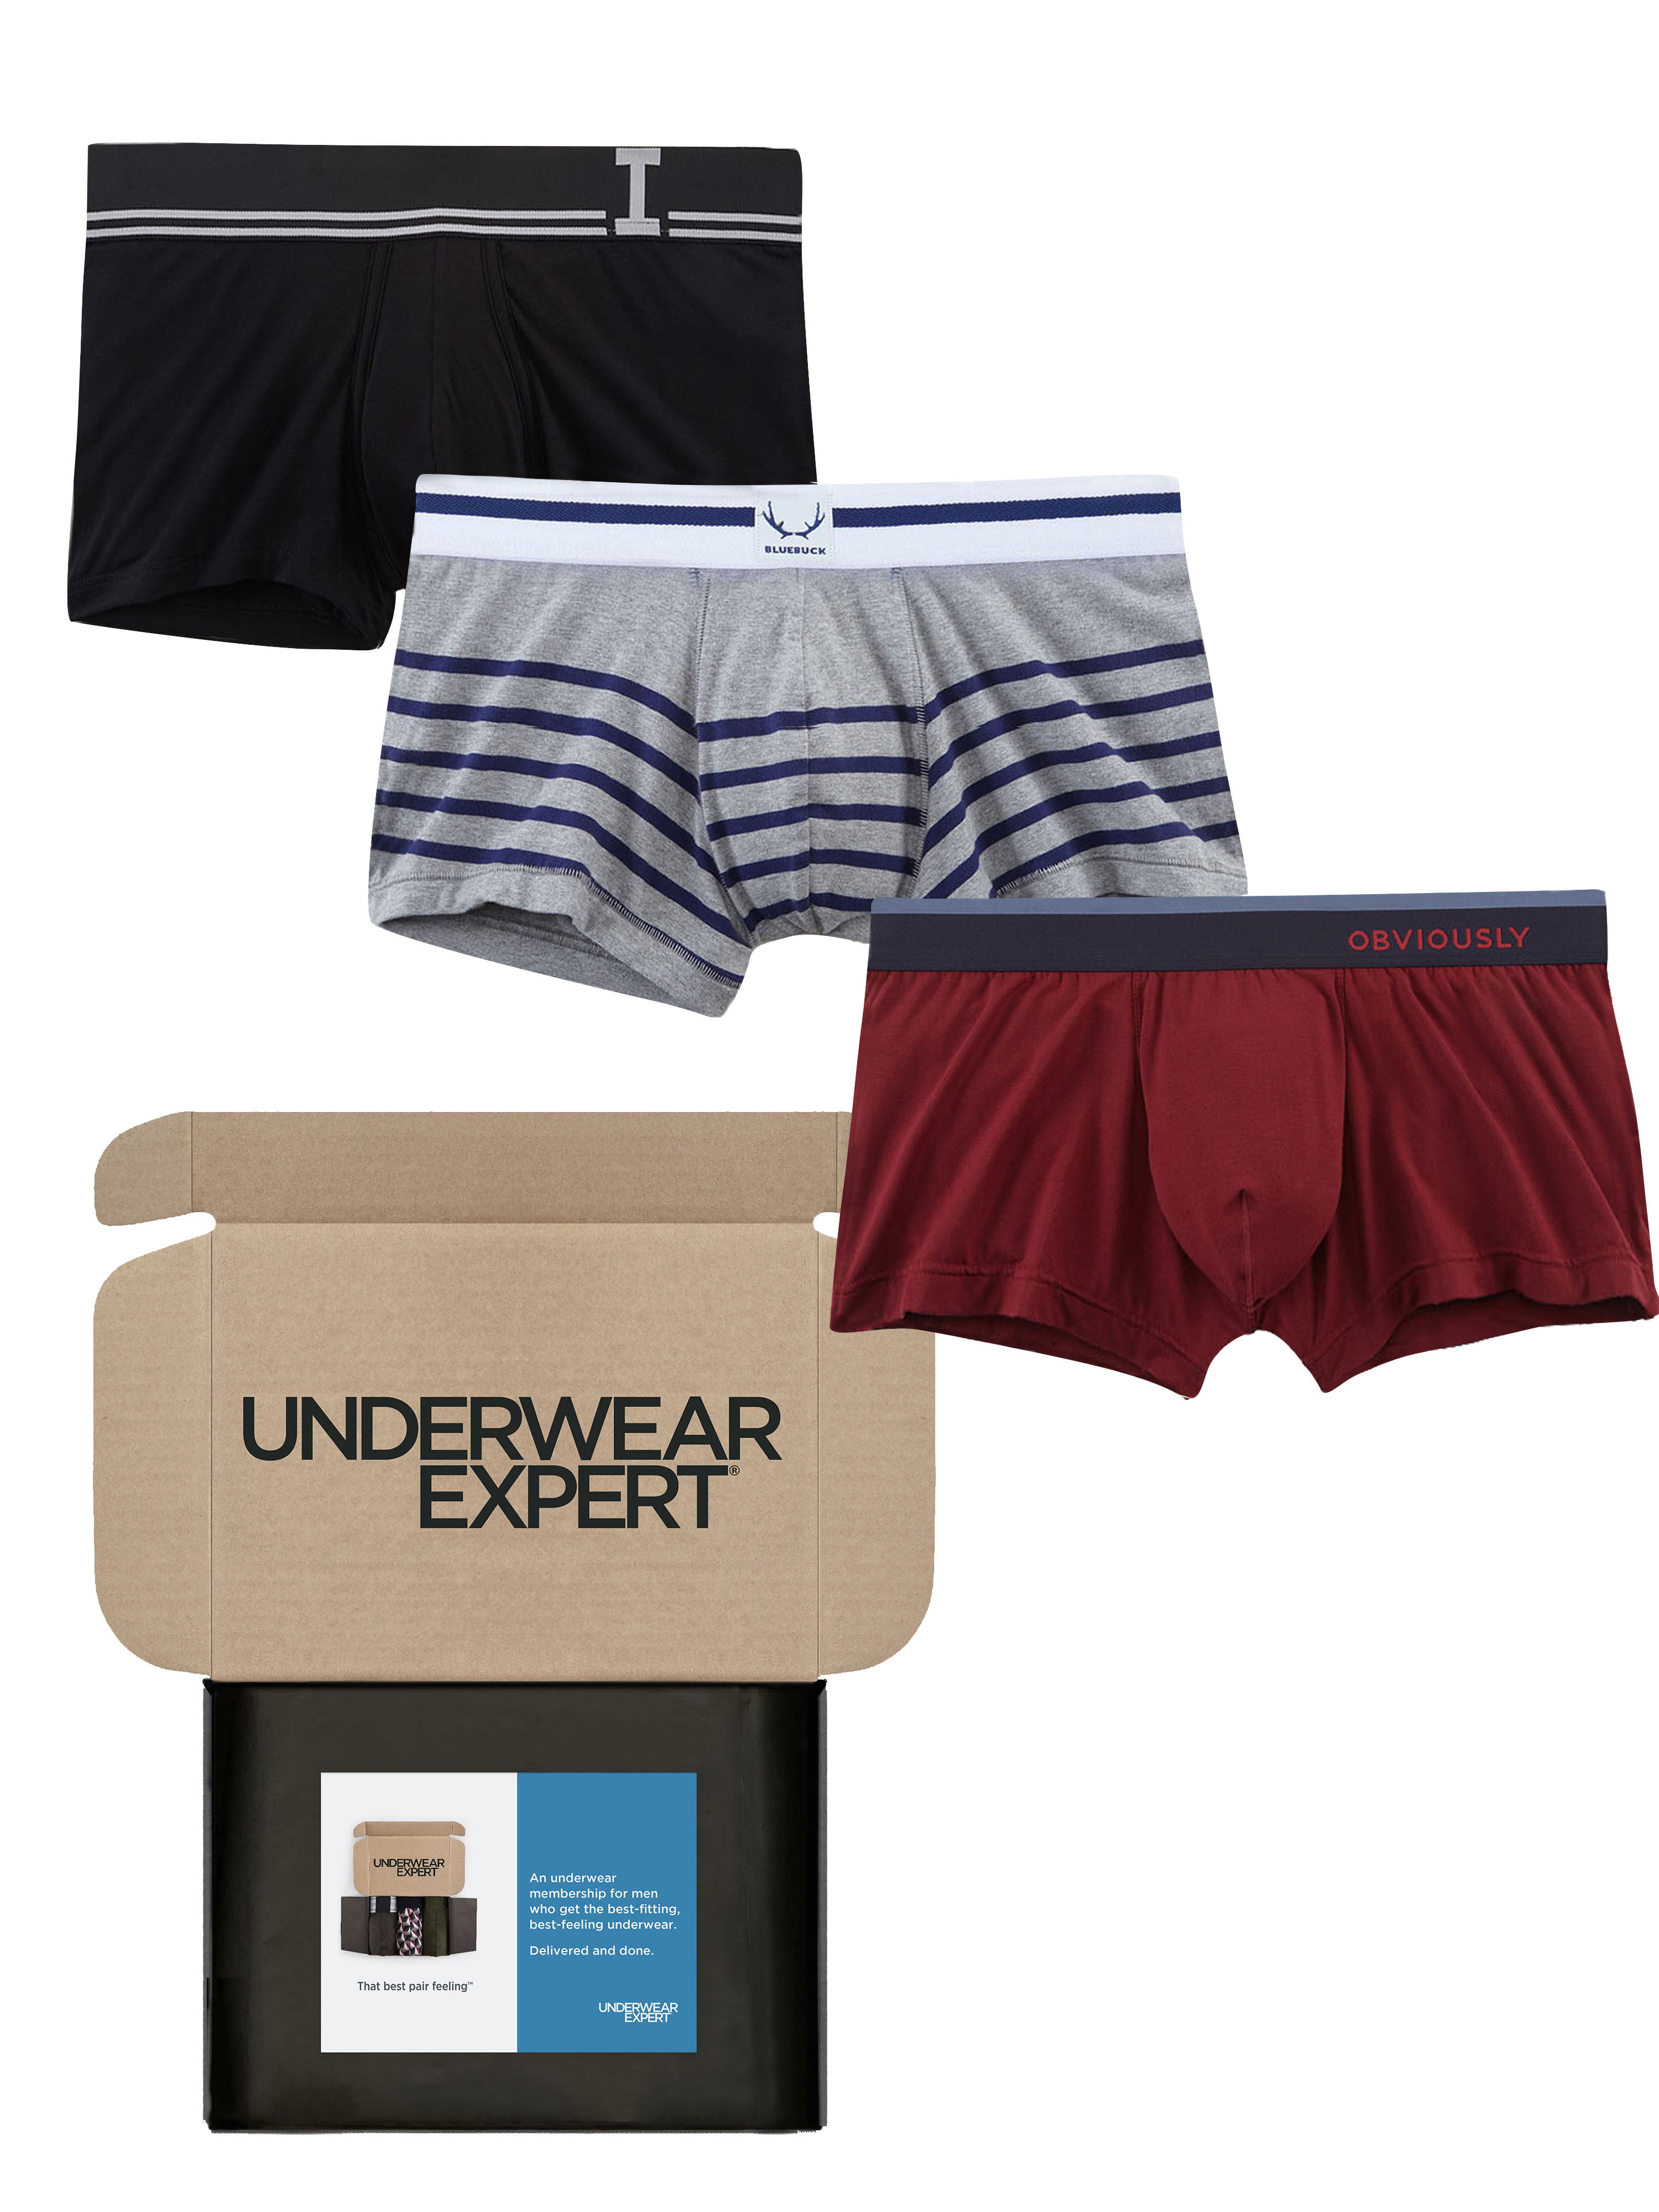 Underwear Expert Men's Trunks Curated Mystery Box, 3 Pairs